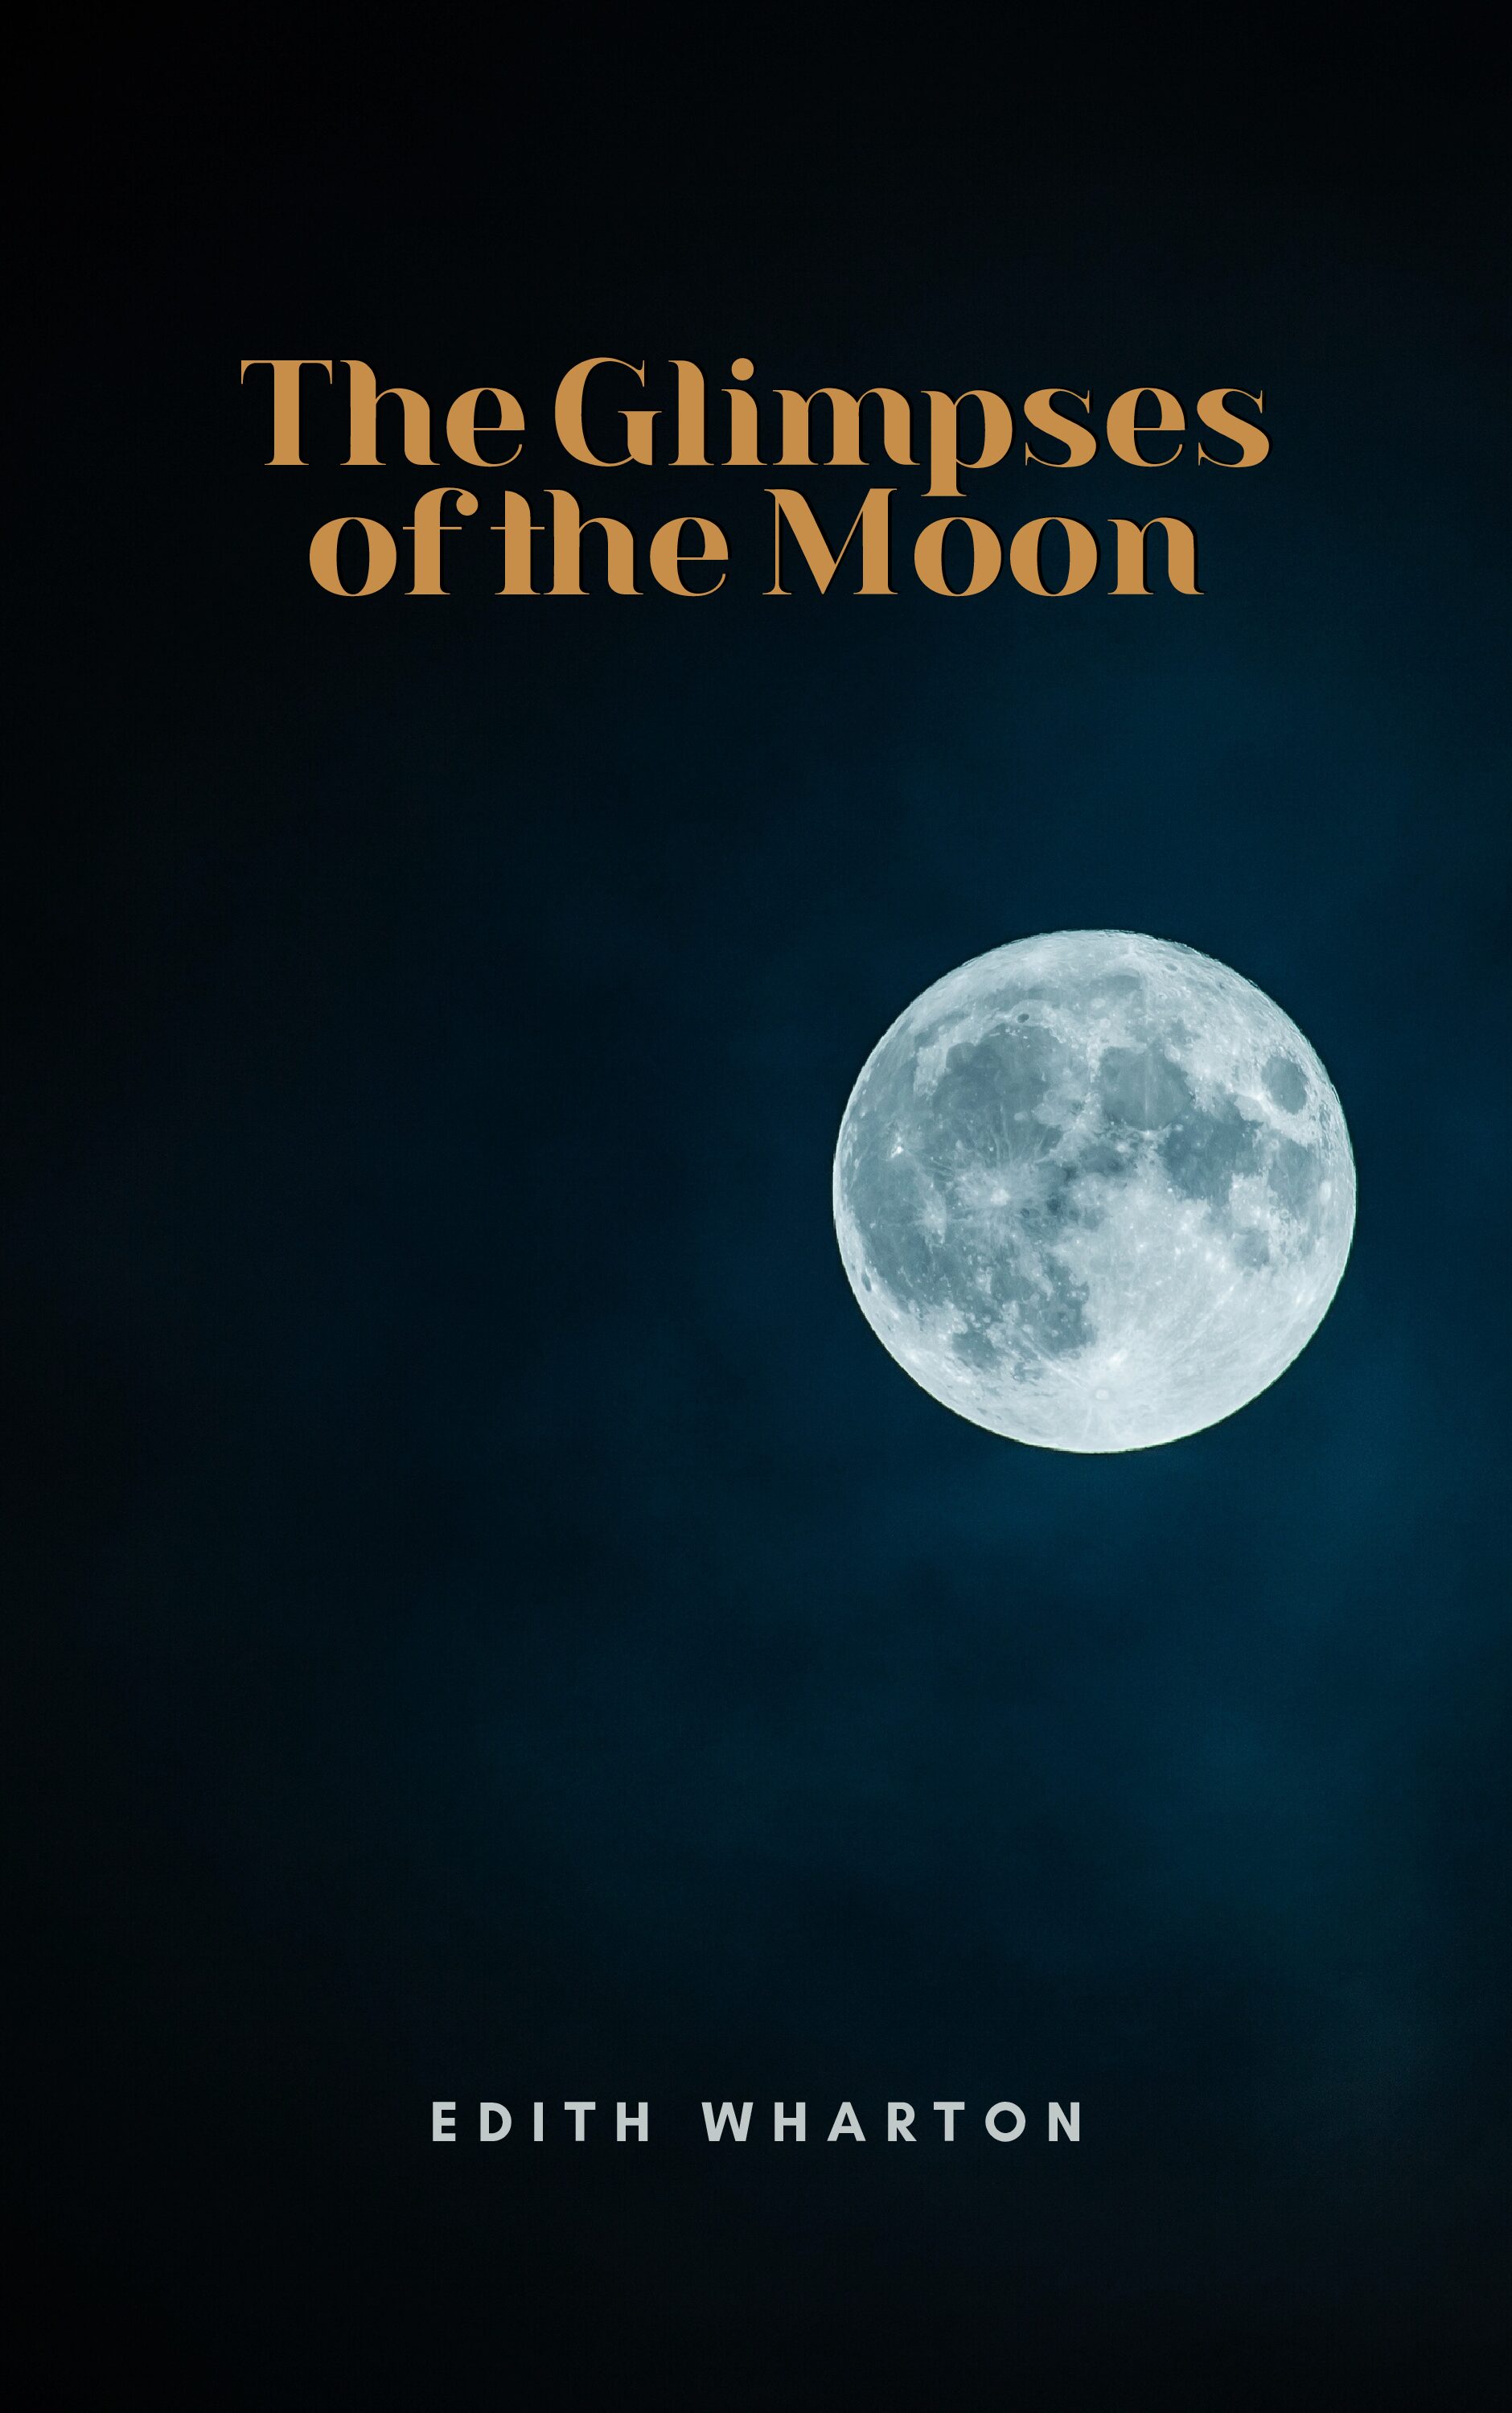 Book Cover: The Glimpses of the Moon